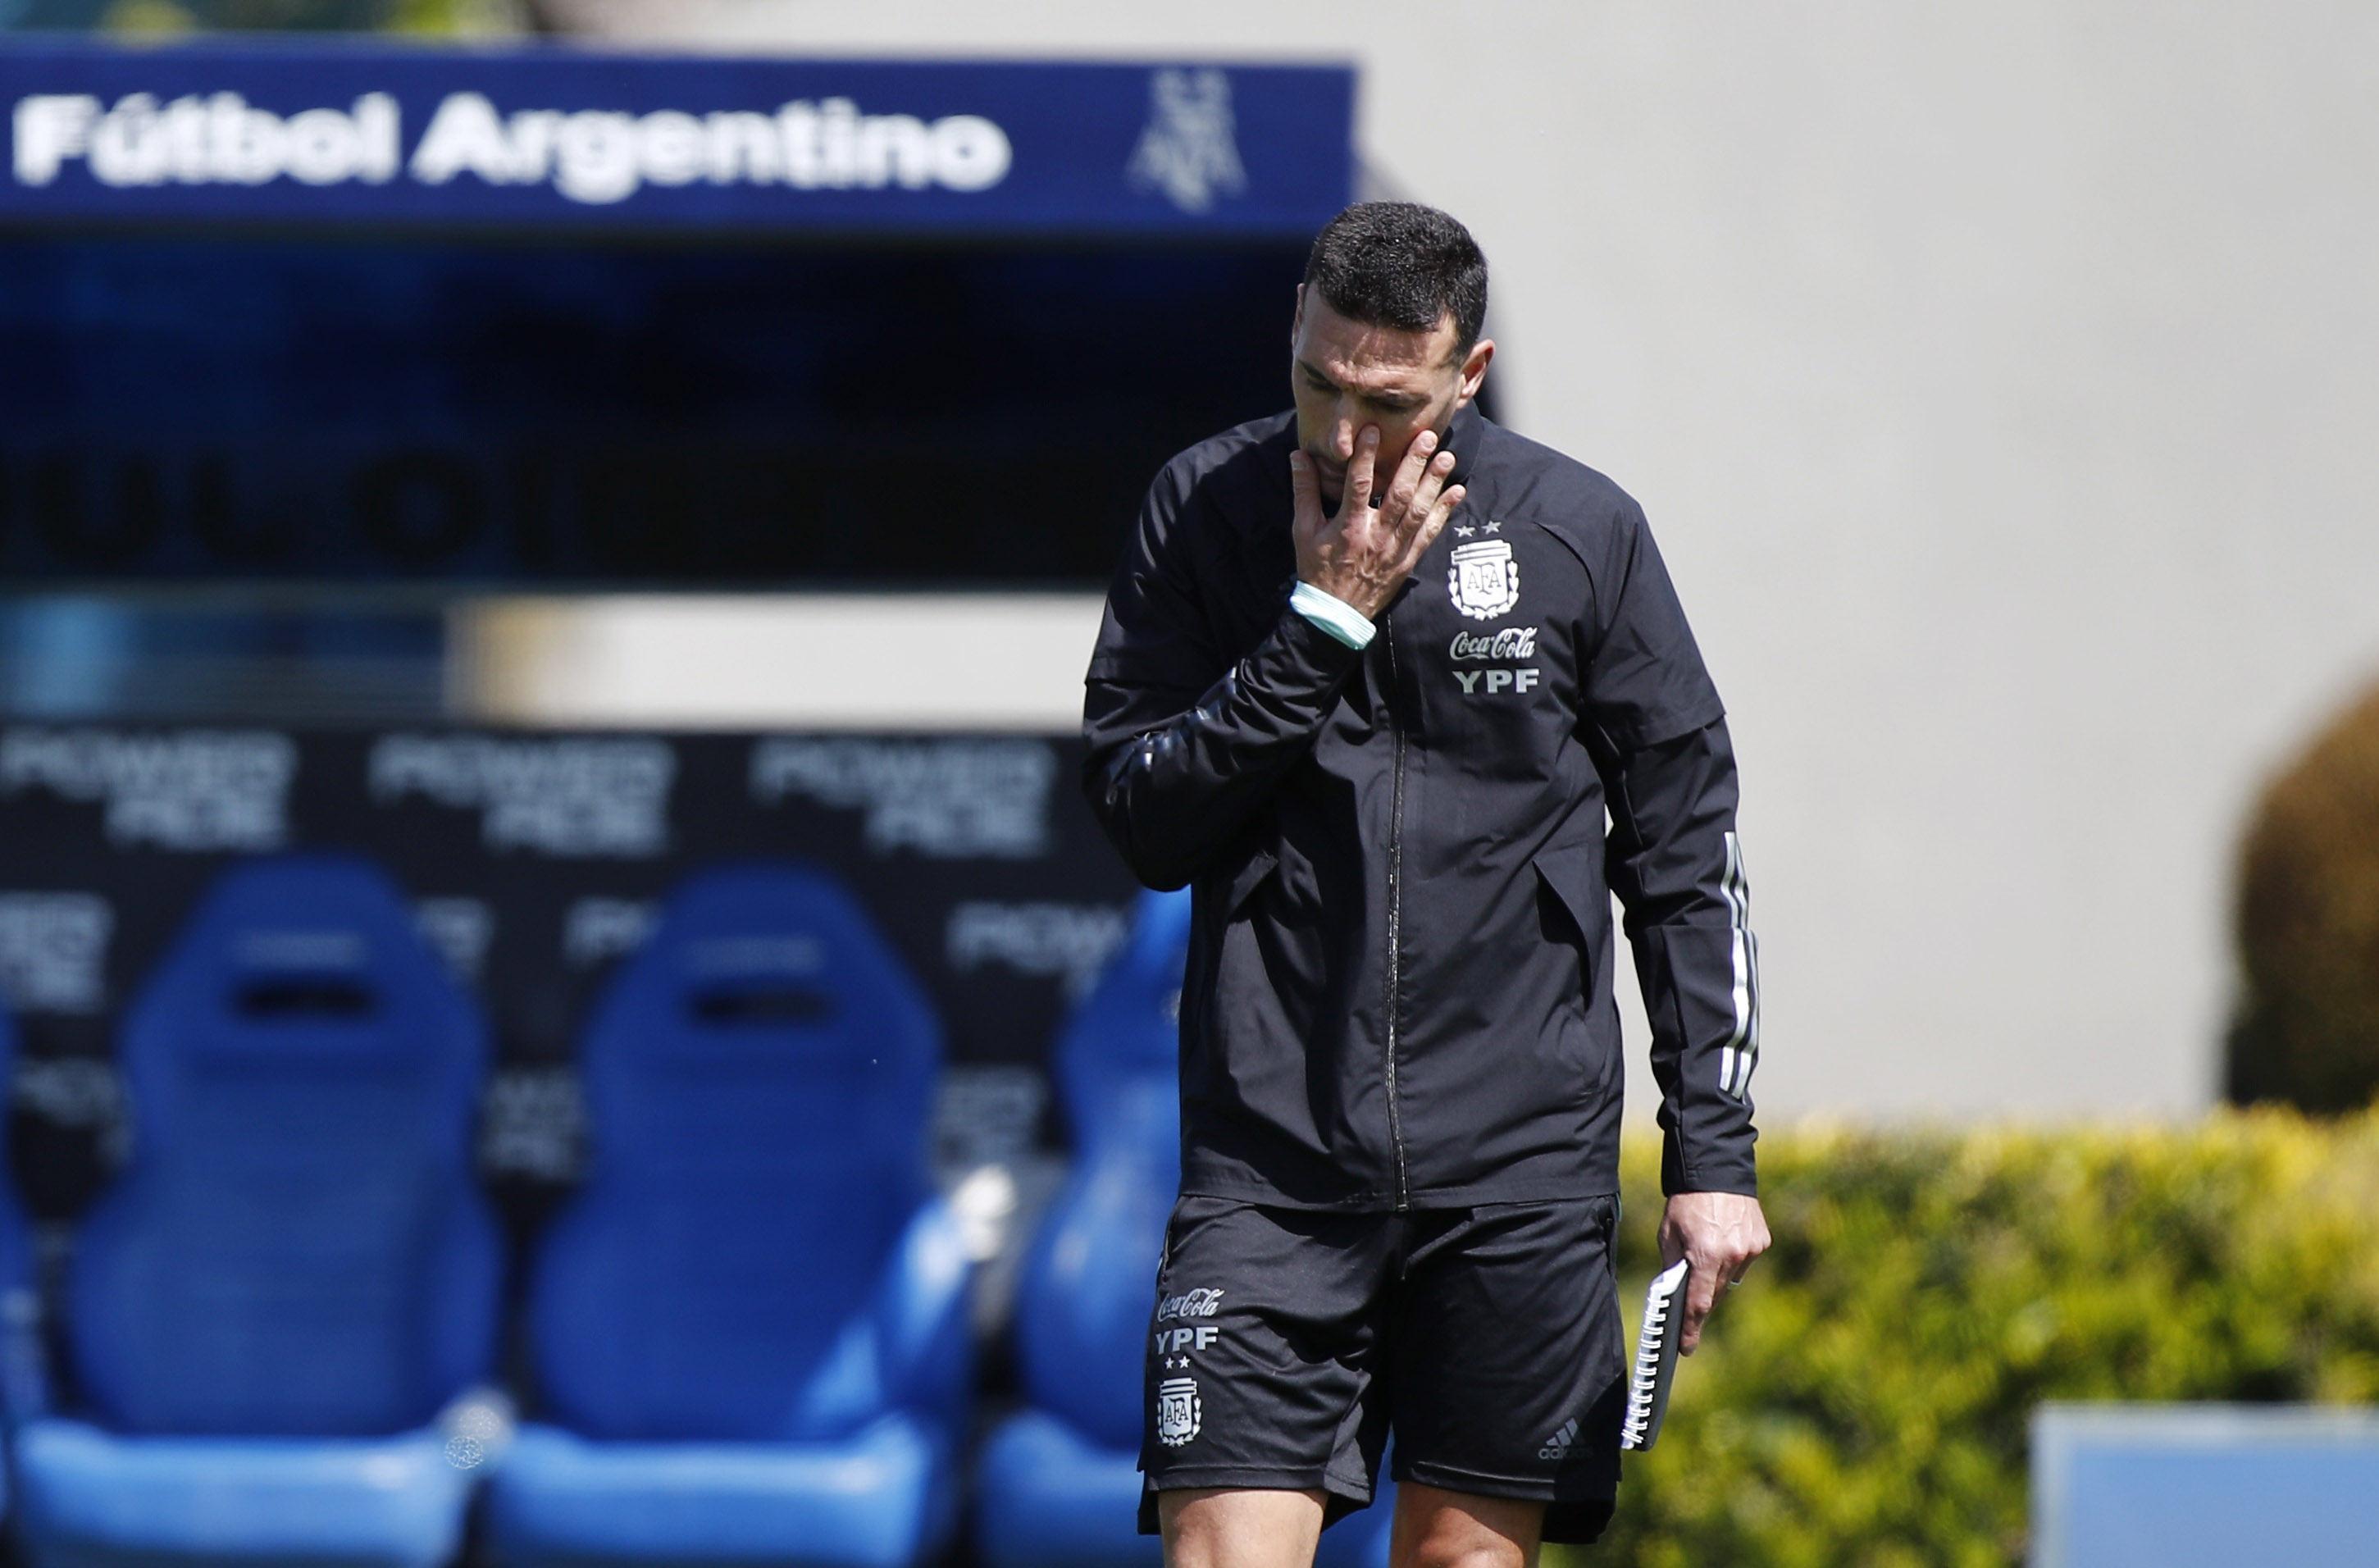 Soccer Football - World Cup - South American Qualifiers - Argentina Training - Julio Humberto Grondona Training Camp, Ezeiza, Argentina - October 6, 2021 Argentina coach Lionel Scaloni during training REUTERS/Agustin Marcarian